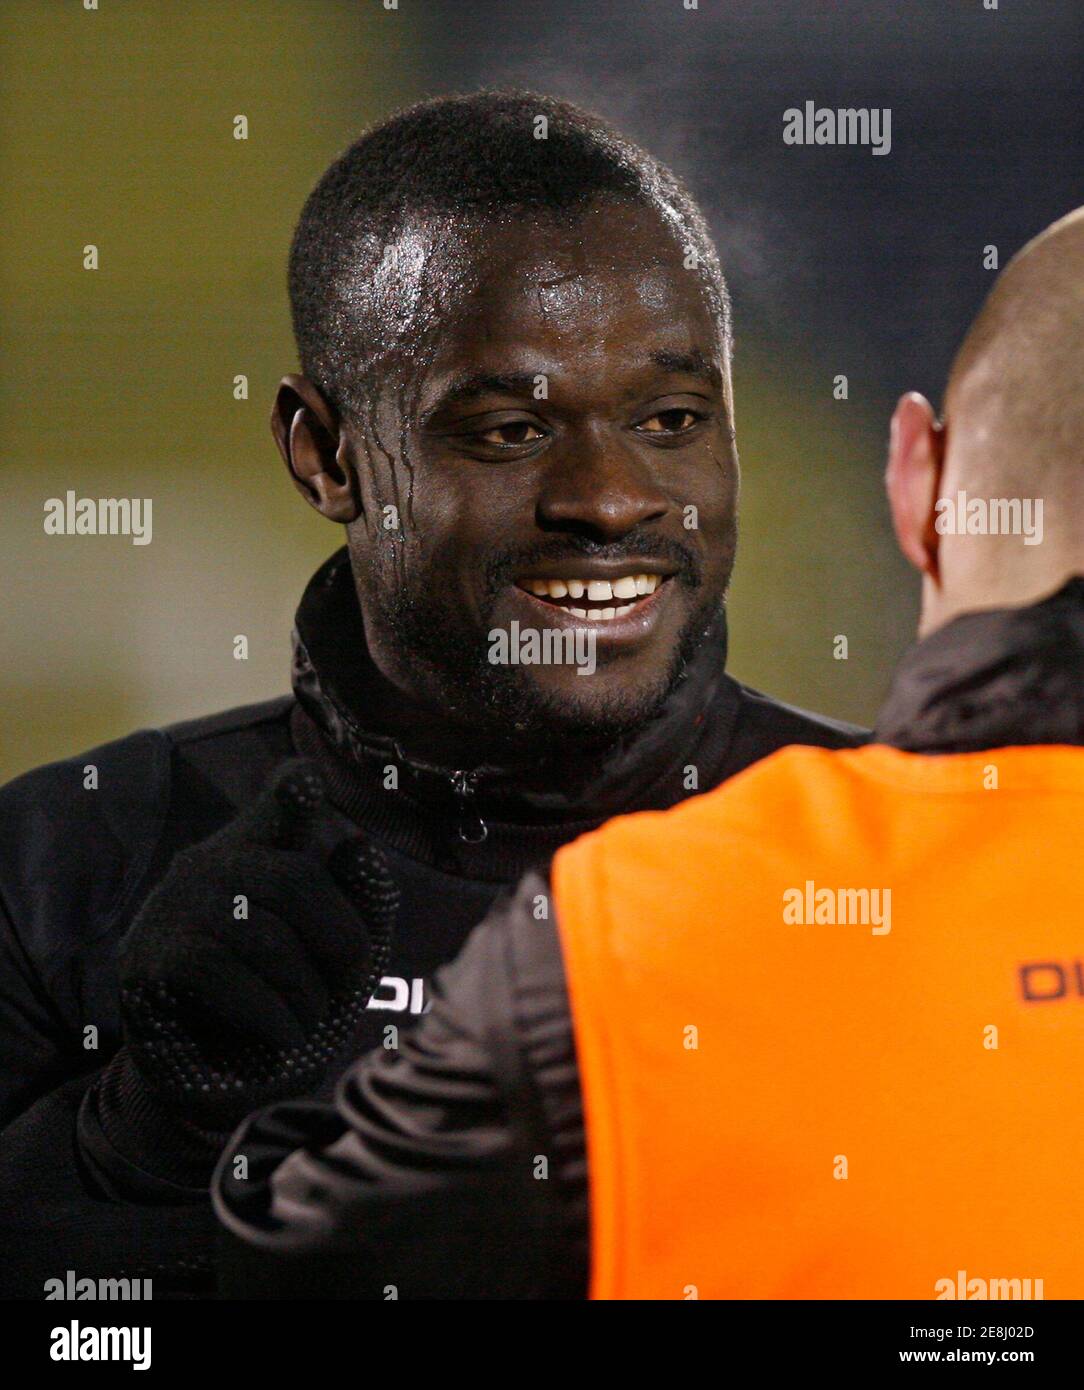 Standard Liege's Mohamed Sarr smiles during a training session in Belgrade November 26, 2008. Standard Liege will face Partizan Belgrade in their UEFA Cup soccer match on Thursday.  REUTERS/Ivan Milutinovic  (REUTERS) Stock Photo